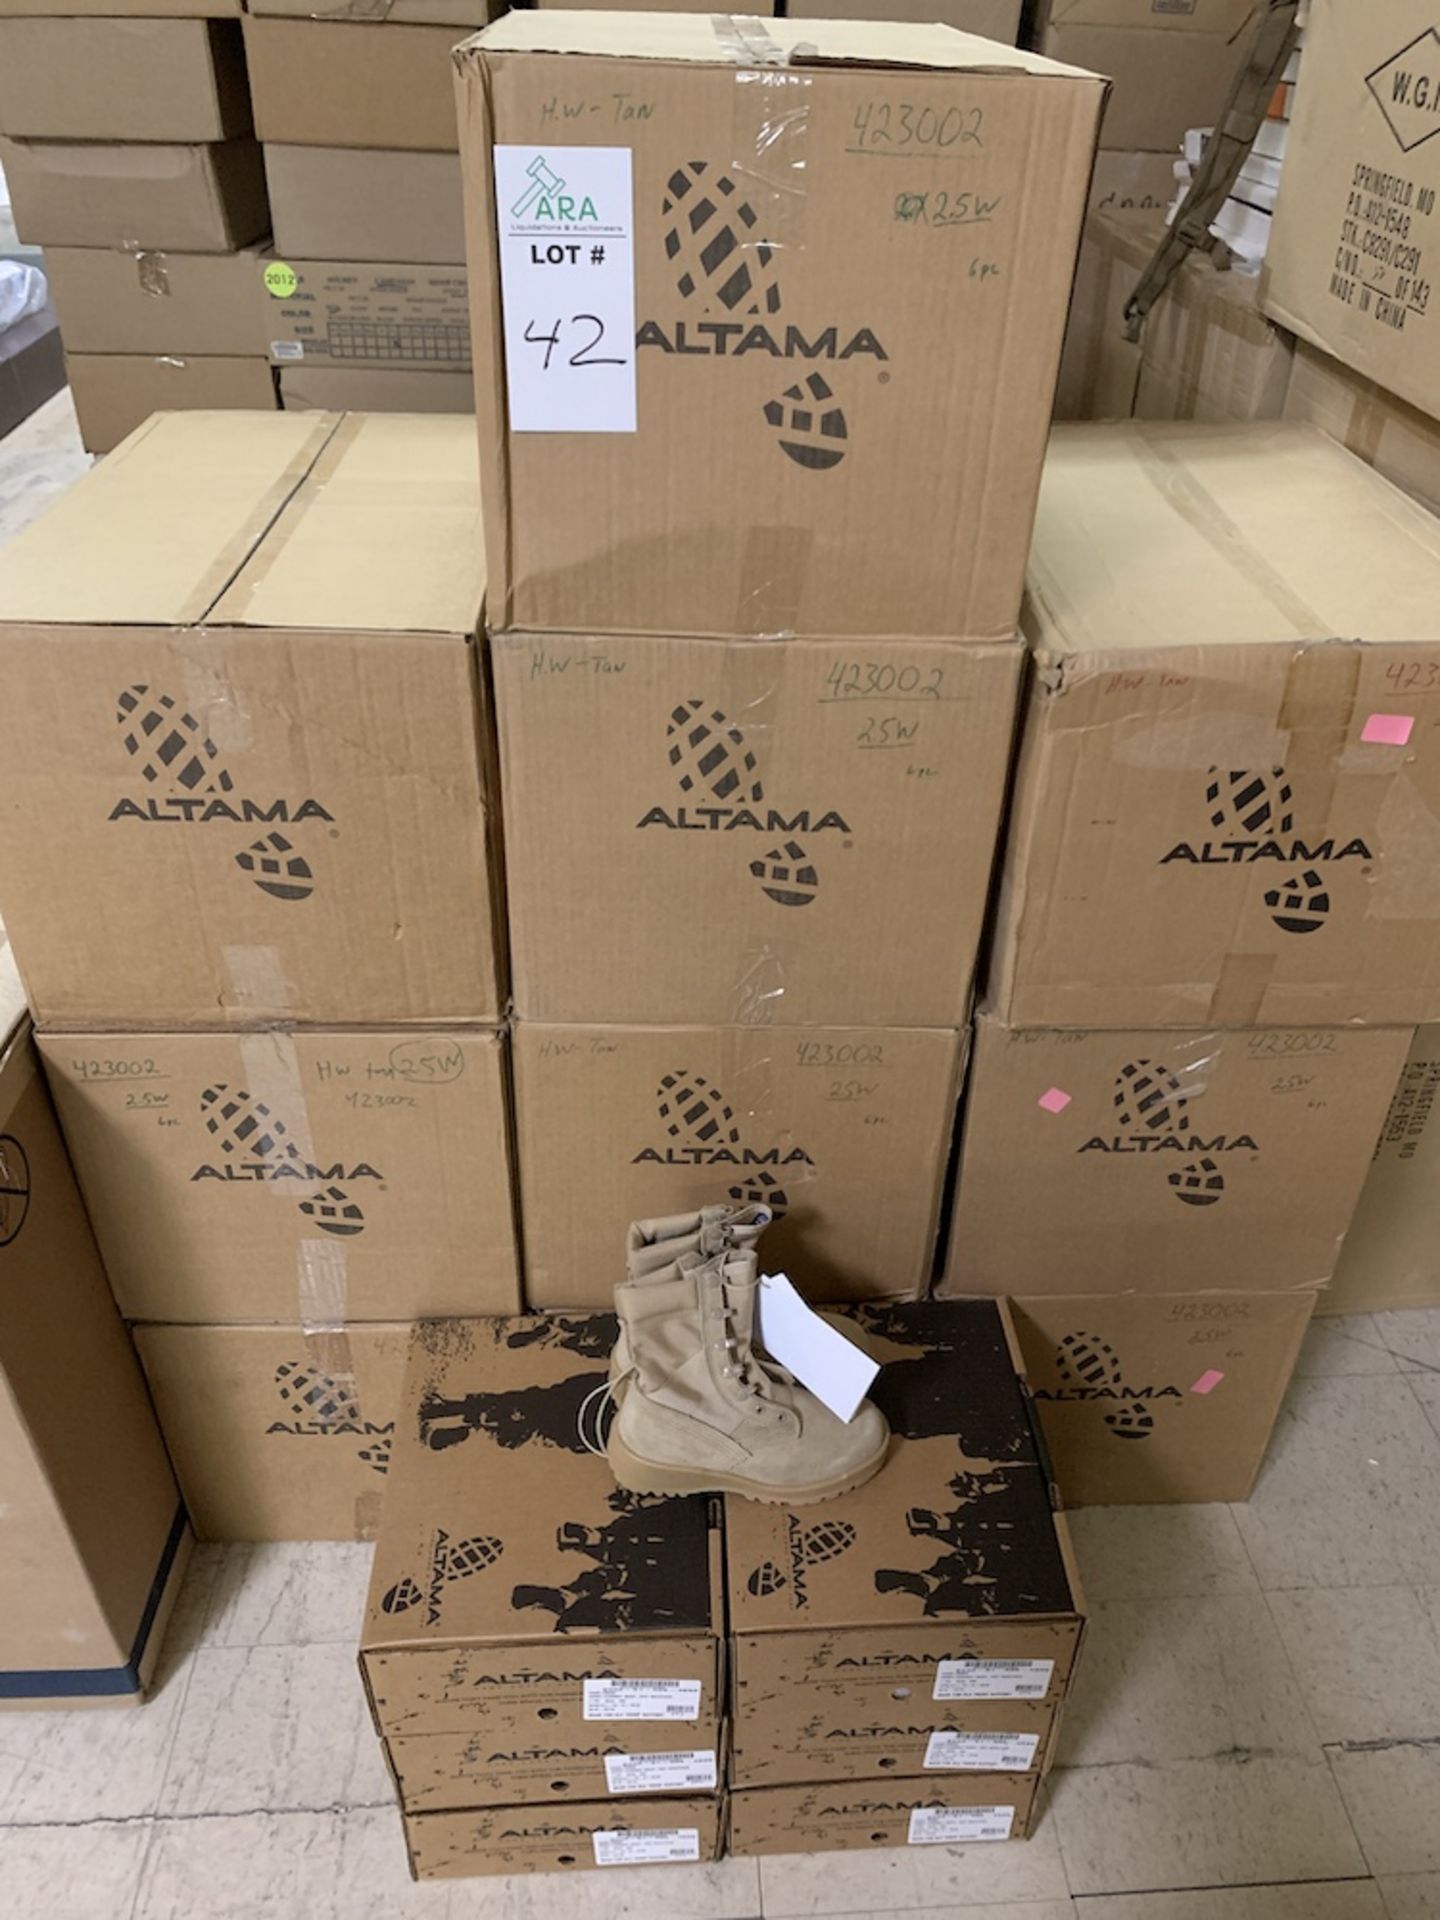 1 Pallet of Altama Army Combat Tan Boots 2B052, 63 Pairs, New in Box, $6,300 Retail. Various Sizes - Image 2 of 4